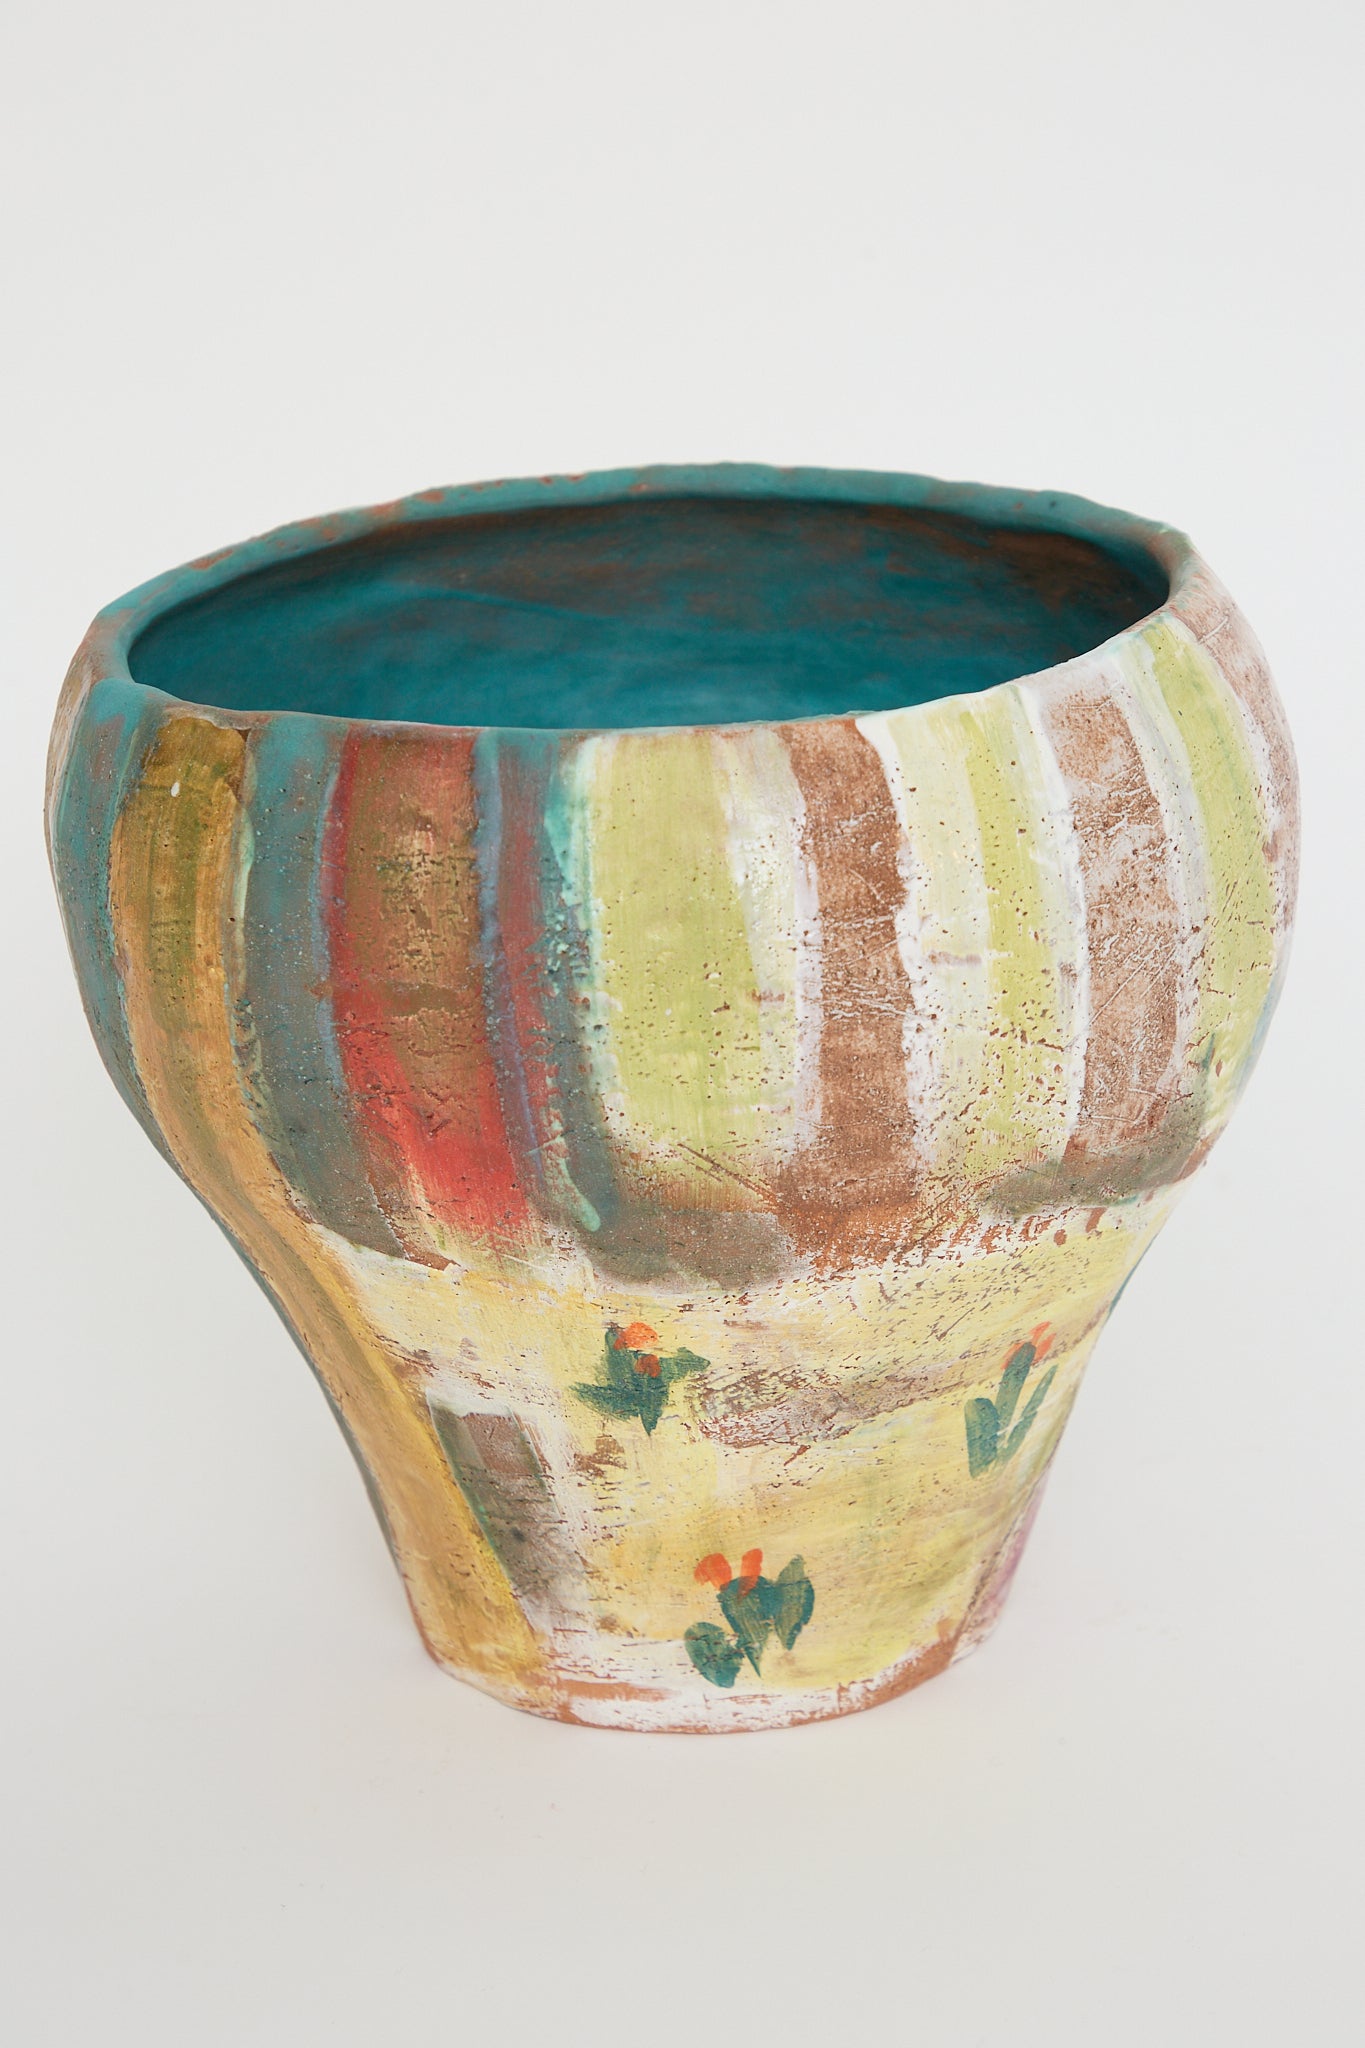 A Shino Takeda Tulips Vase with a colorful hand-painted detail.